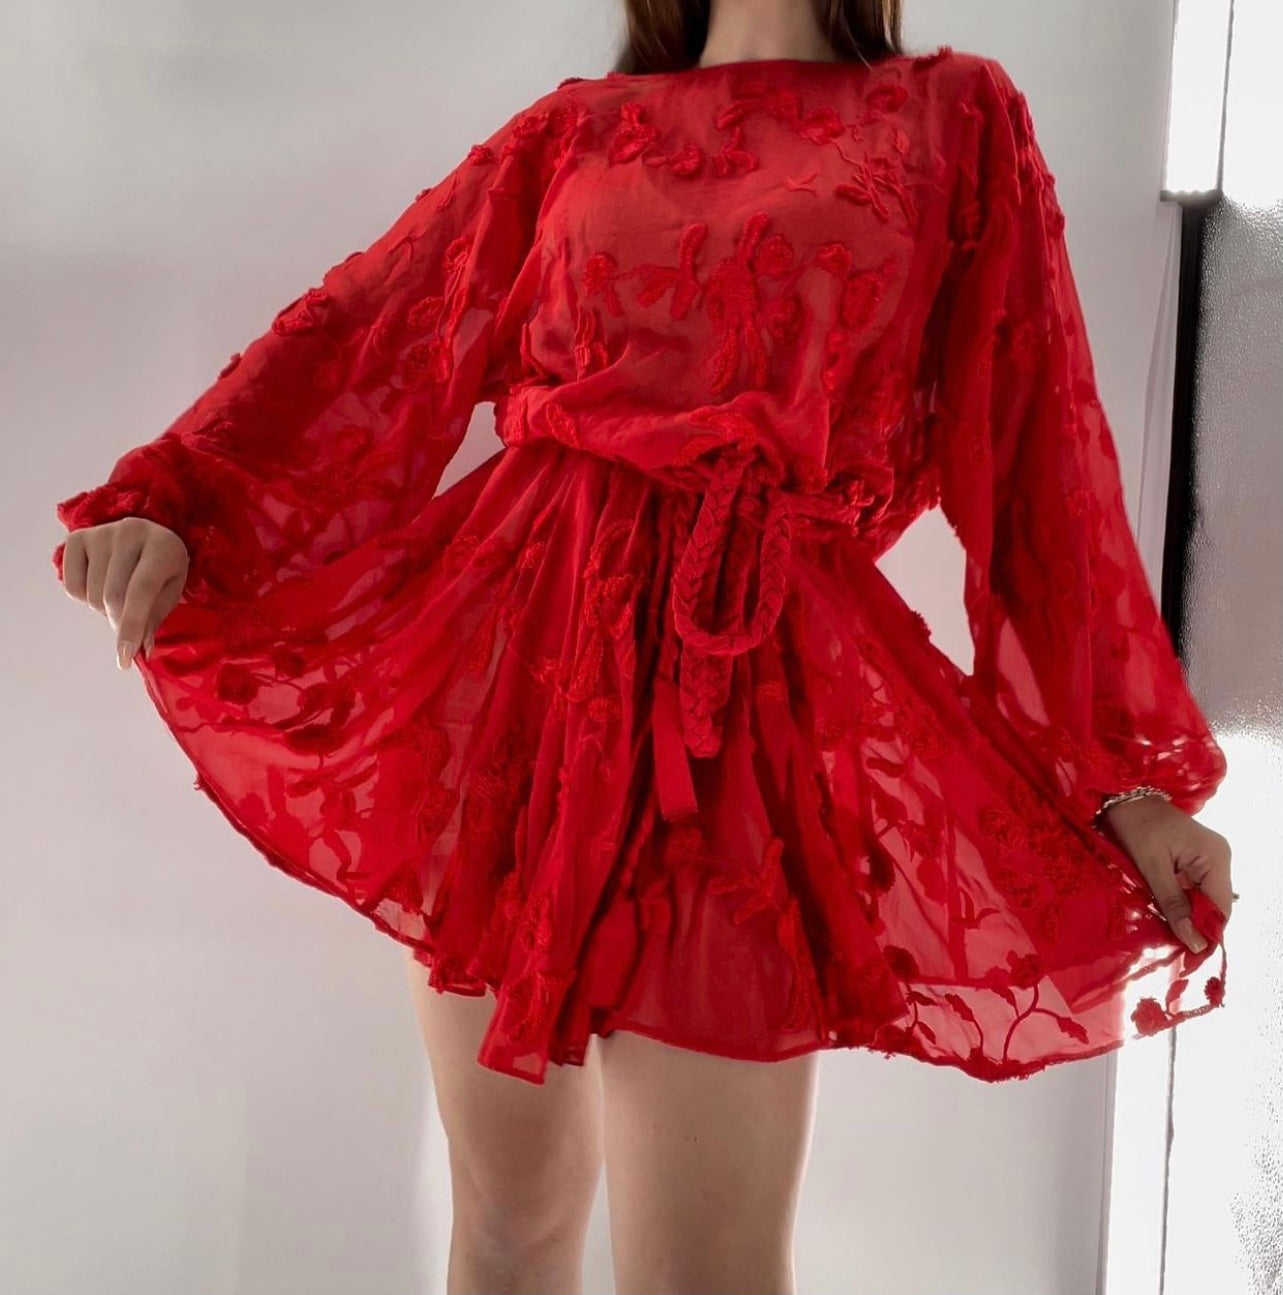 Mare Mare - Red Mesh Embroidered Flower Mini Dress